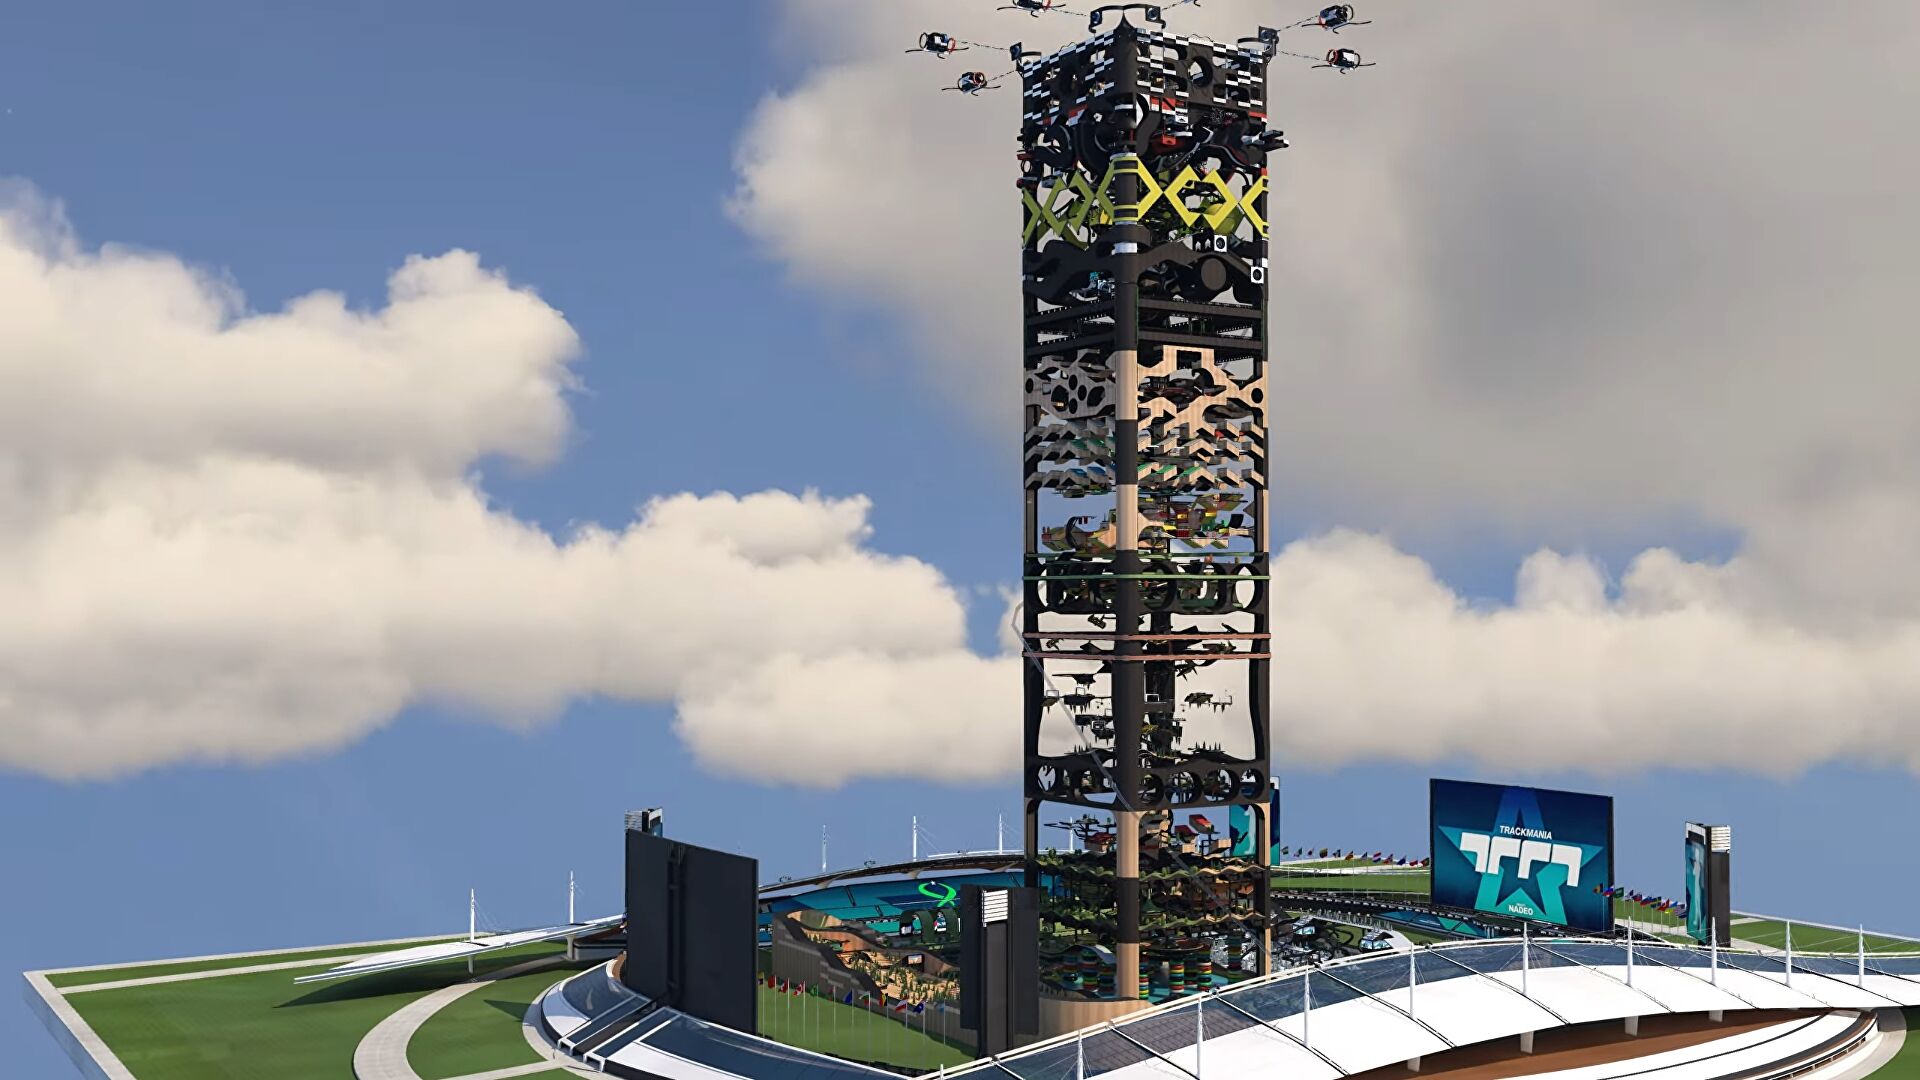 This Getting Over It-inspired Trackmania track is beautiful and painful to behold